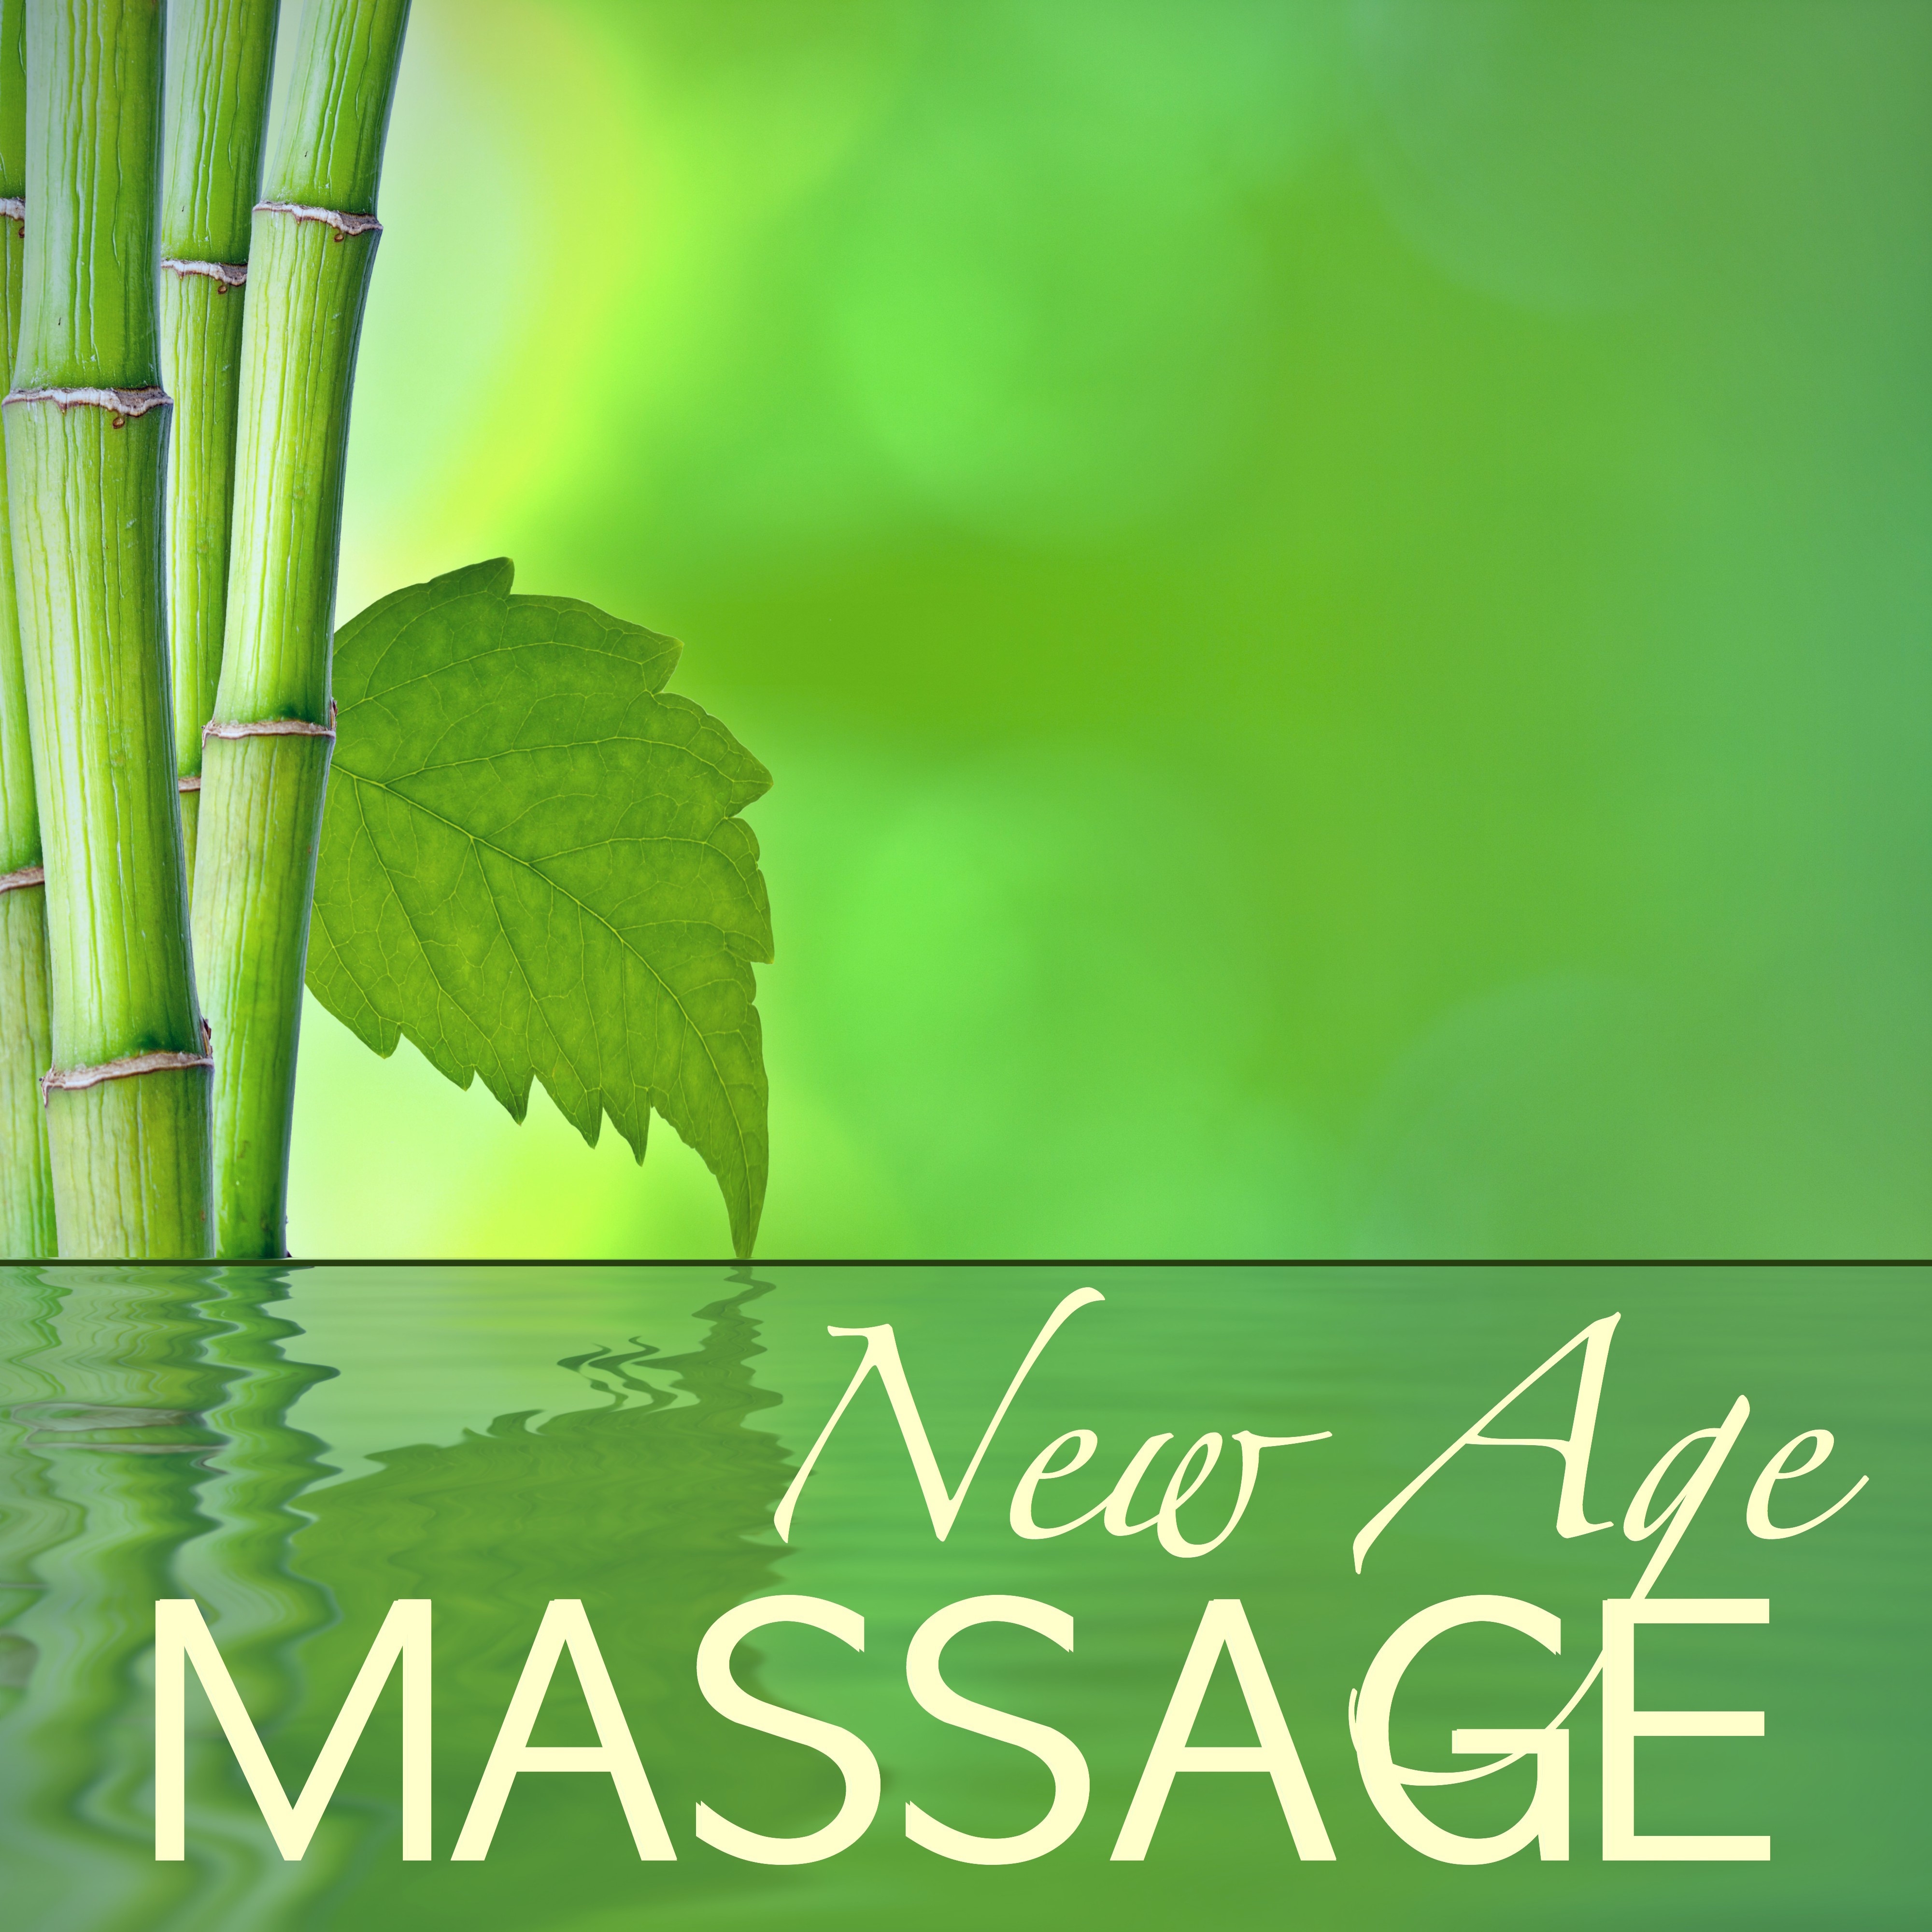 New Age Massage - New Age & Chillout Music, Relaxing Spa Experience for Complete Regeneration